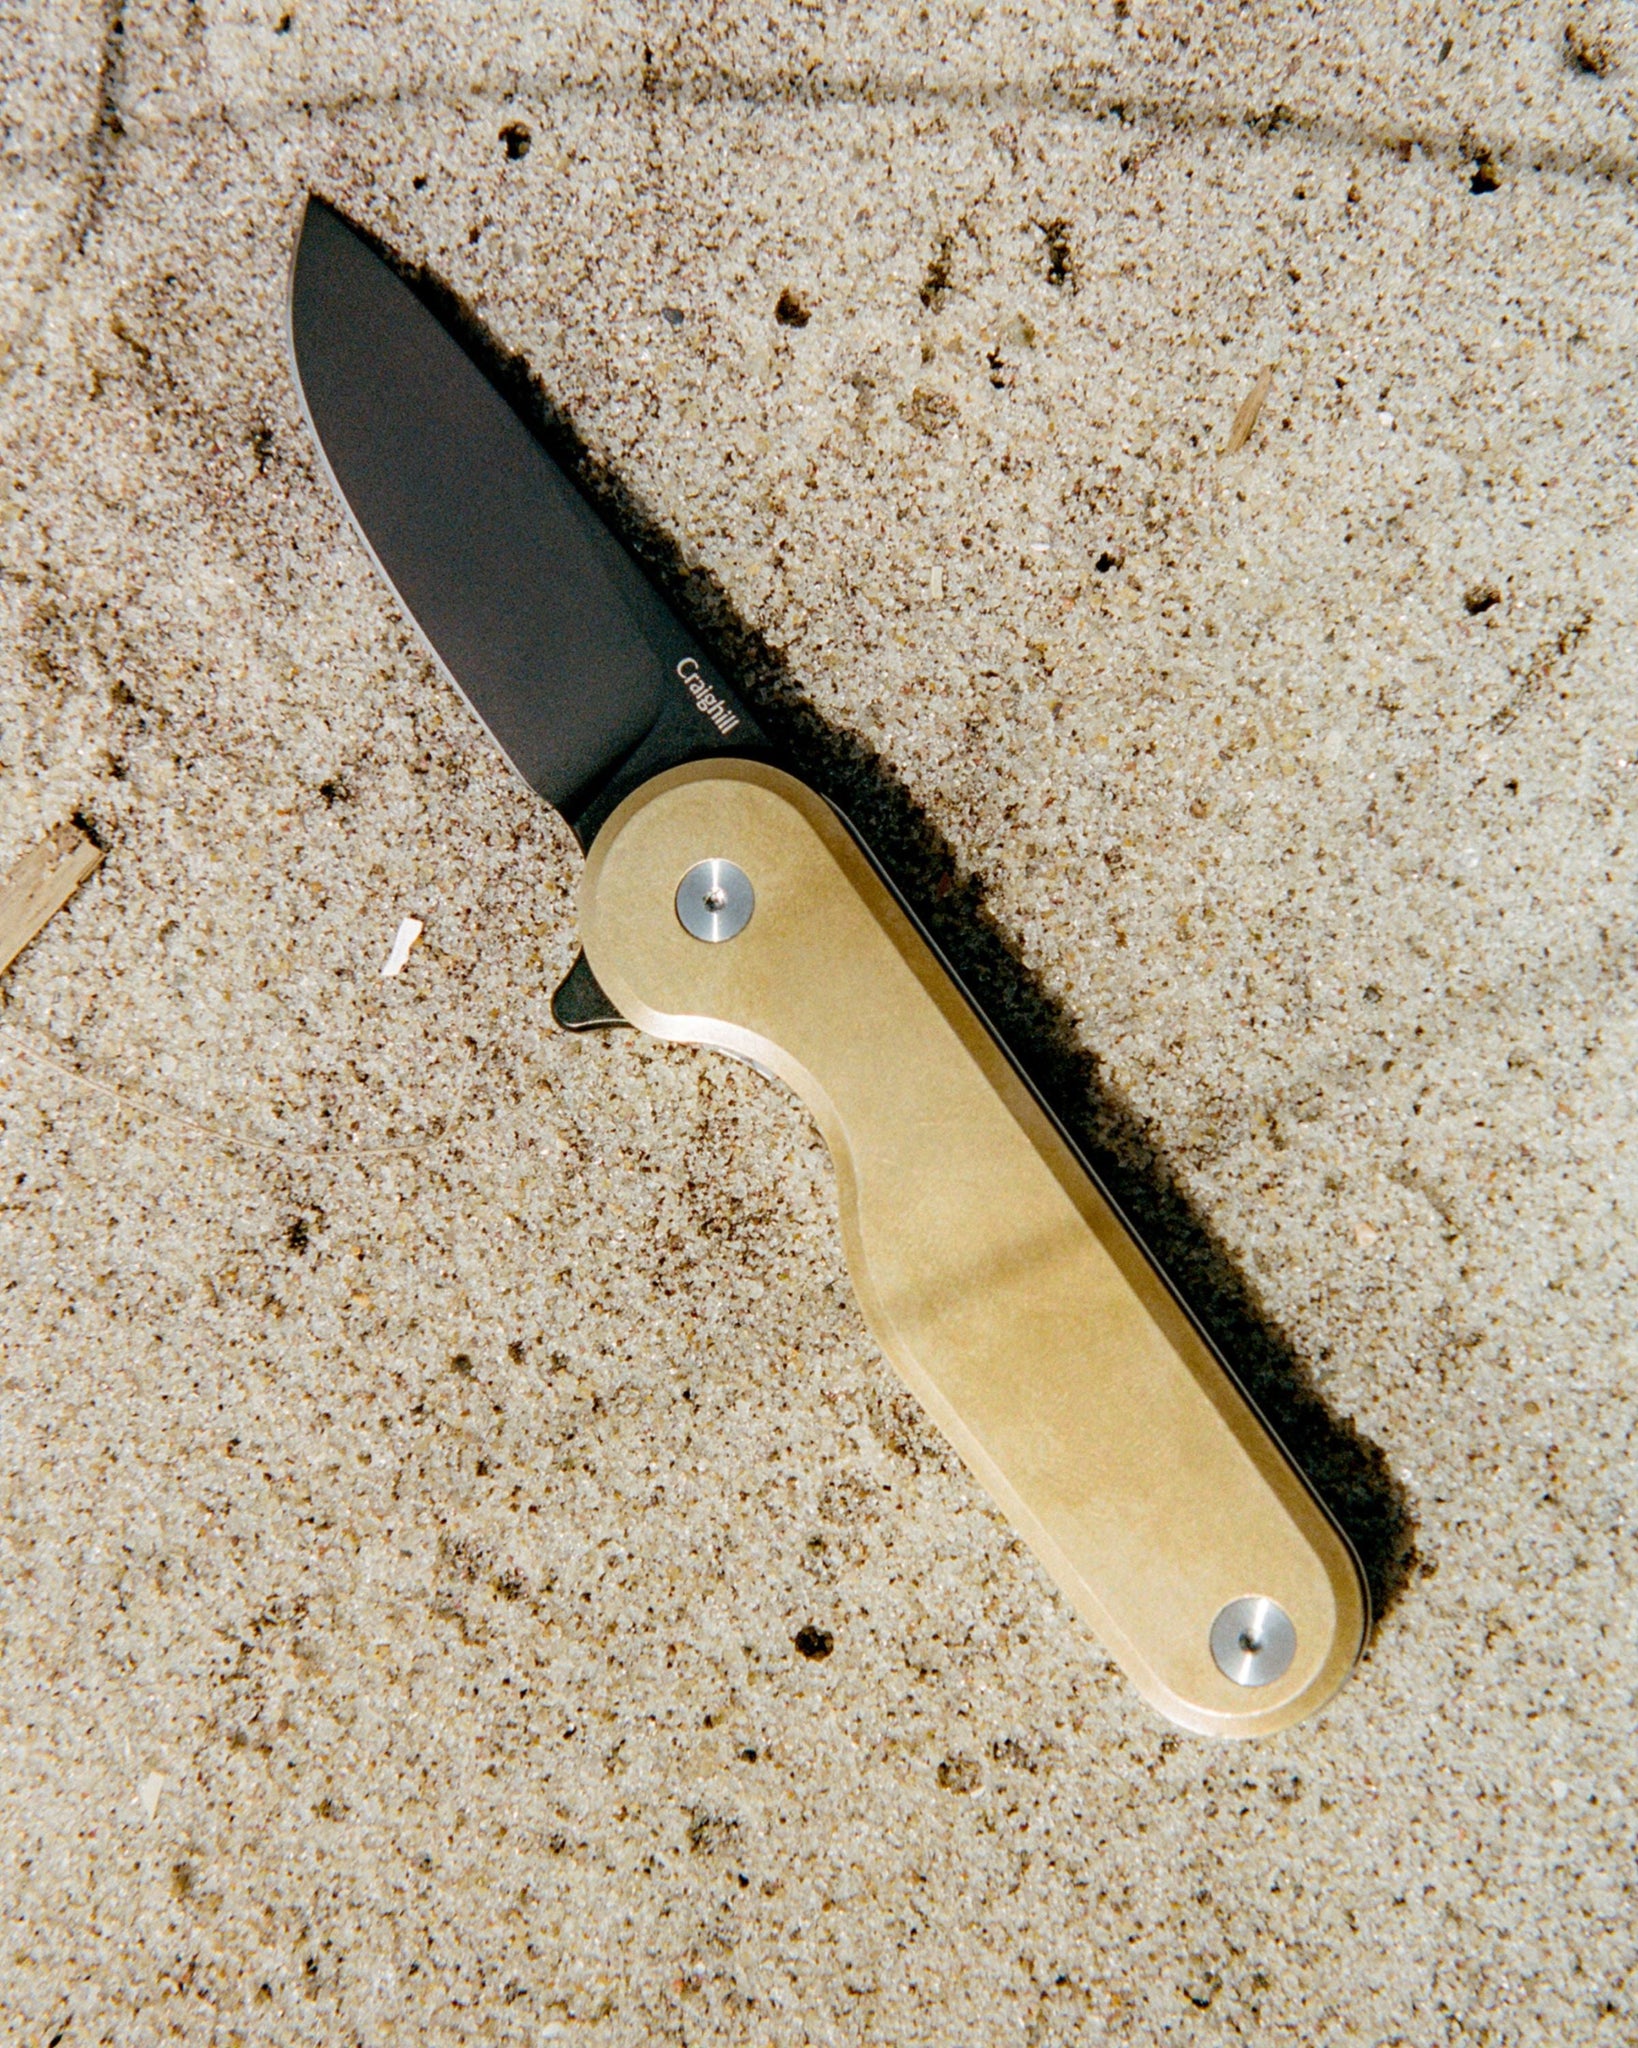 Craighill - Rook Knife